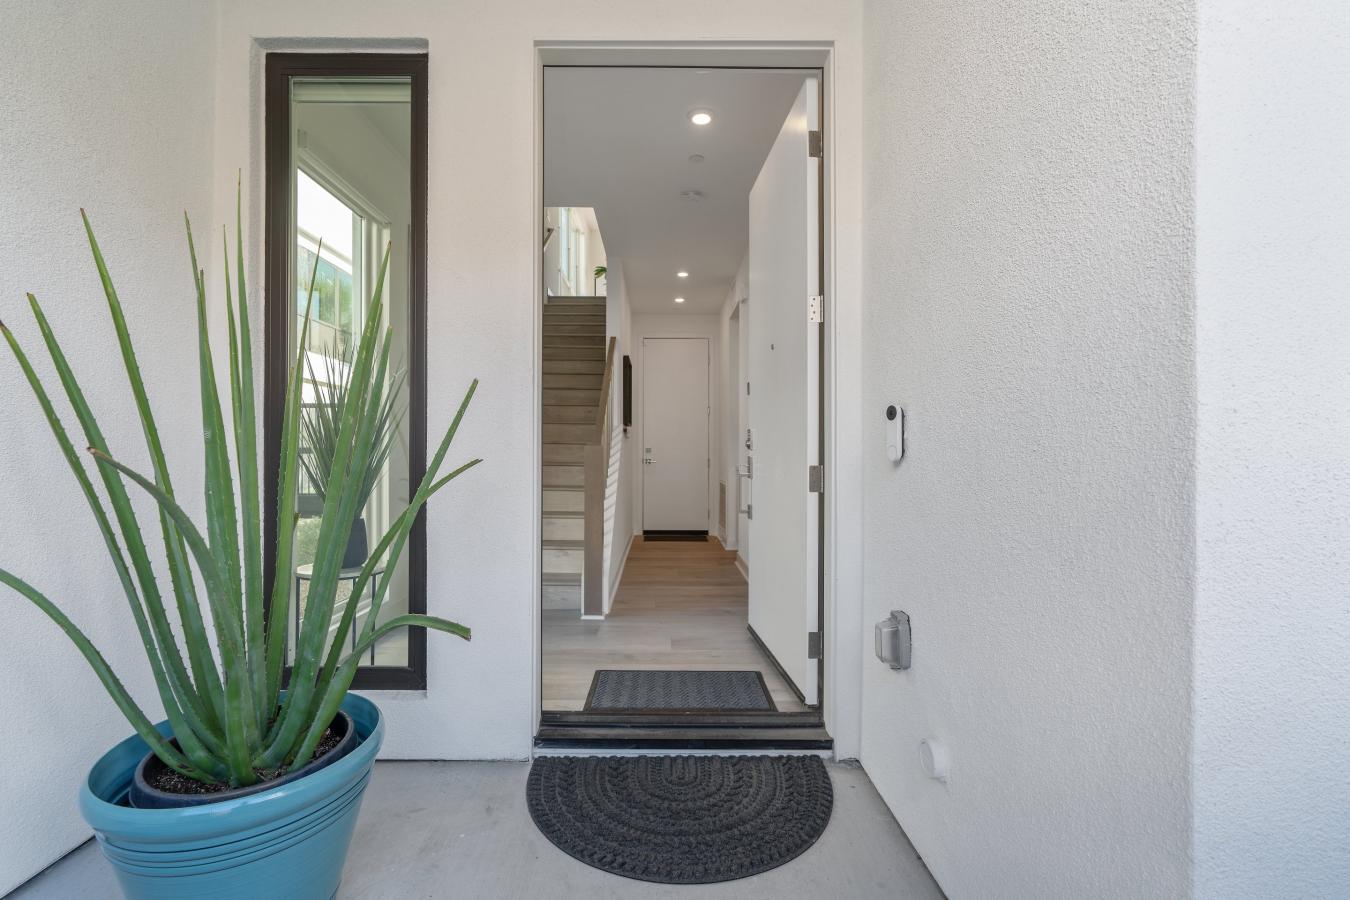 918 Cameron Center Drive, Palm Springs, California, 92262, United States, 2 Bedrooms Bedrooms, ,2 BathroomsBathrooms,Residential,For Sale,918 Cameron Center Drive,1465385